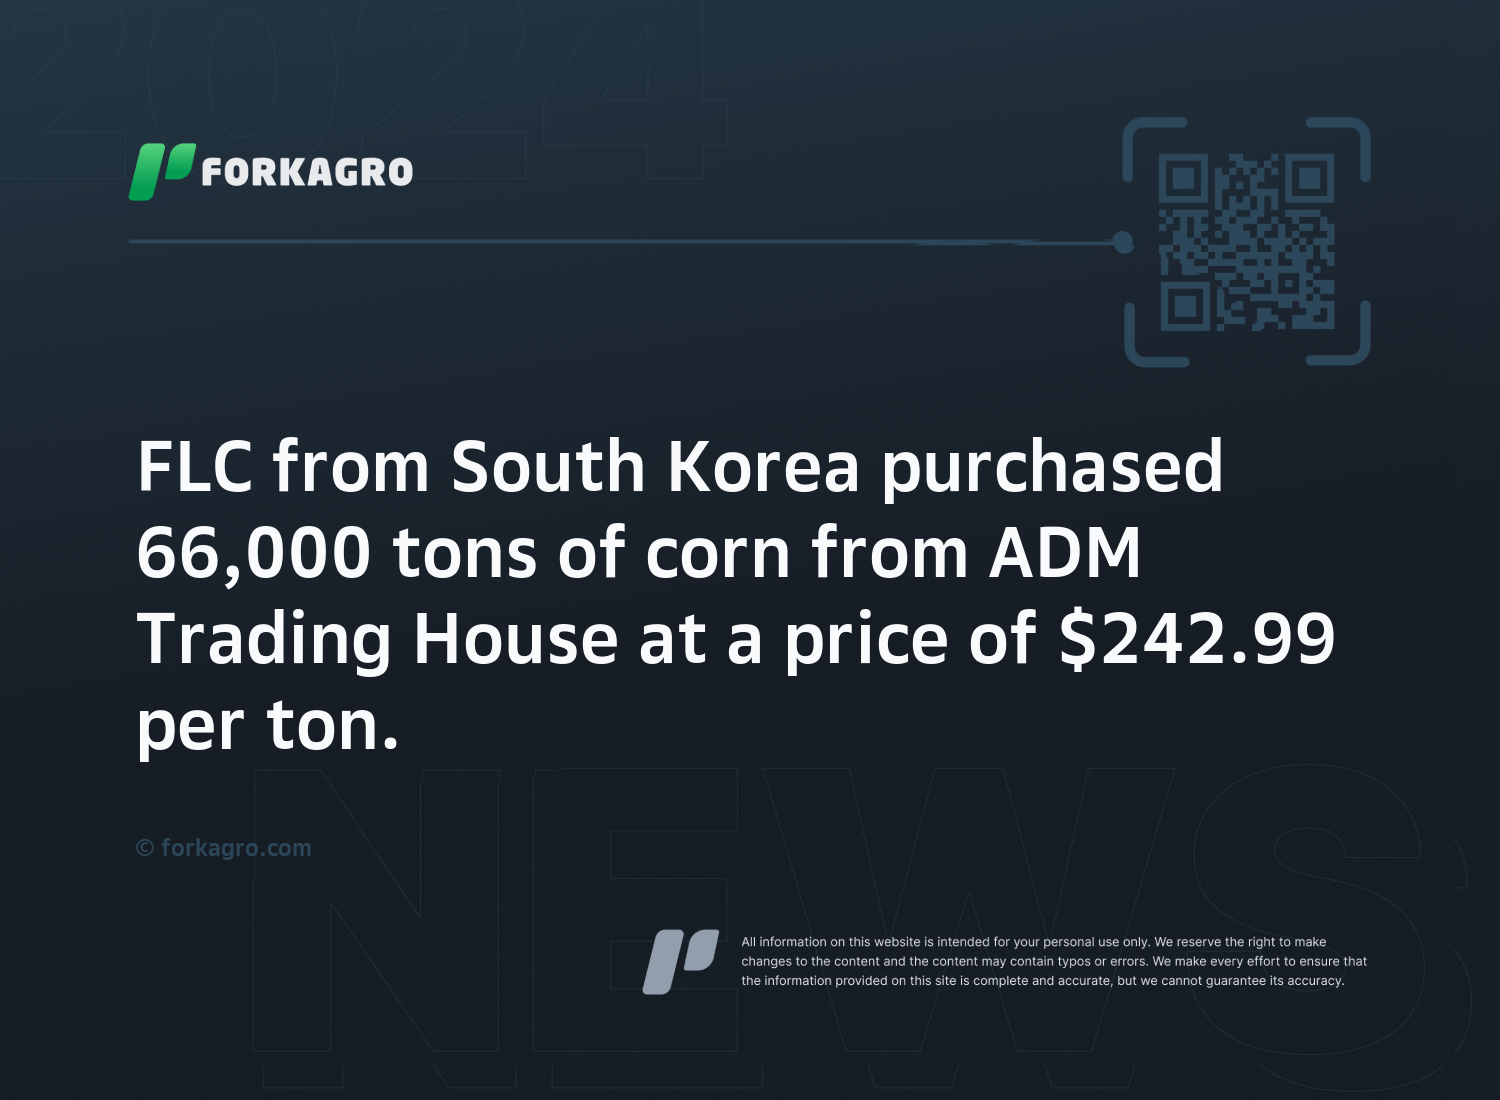 FLC from South Korea purchased 66,000 tons of corn from ADM Trading House at a price of $242.99 per ton.